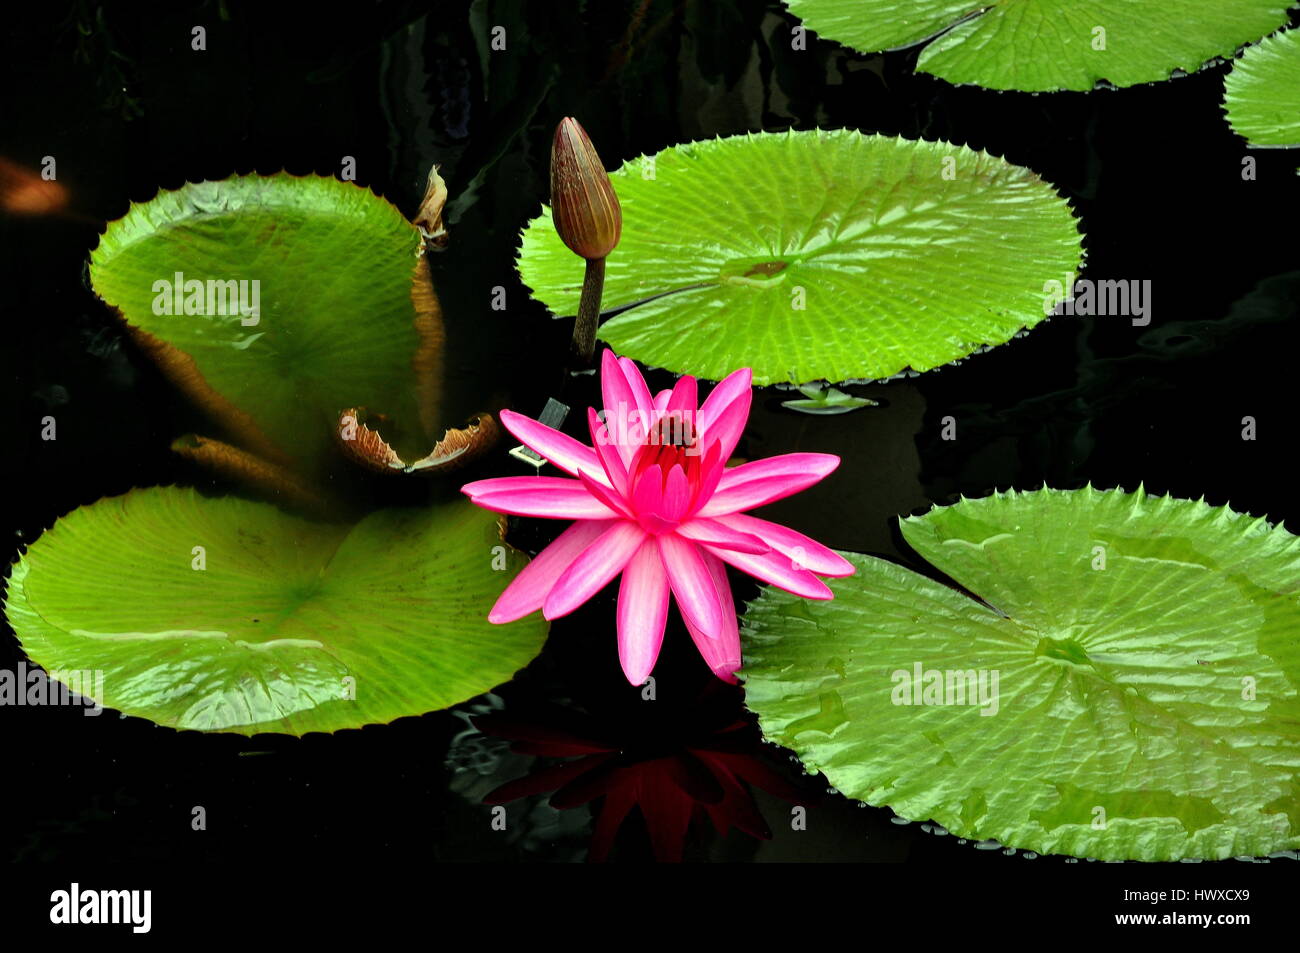 Kennett Square, Pennsylvania:  Cerise water Lily blossom with bud and pads in the outdoor water pool at Longwood Gardens Stock Photo